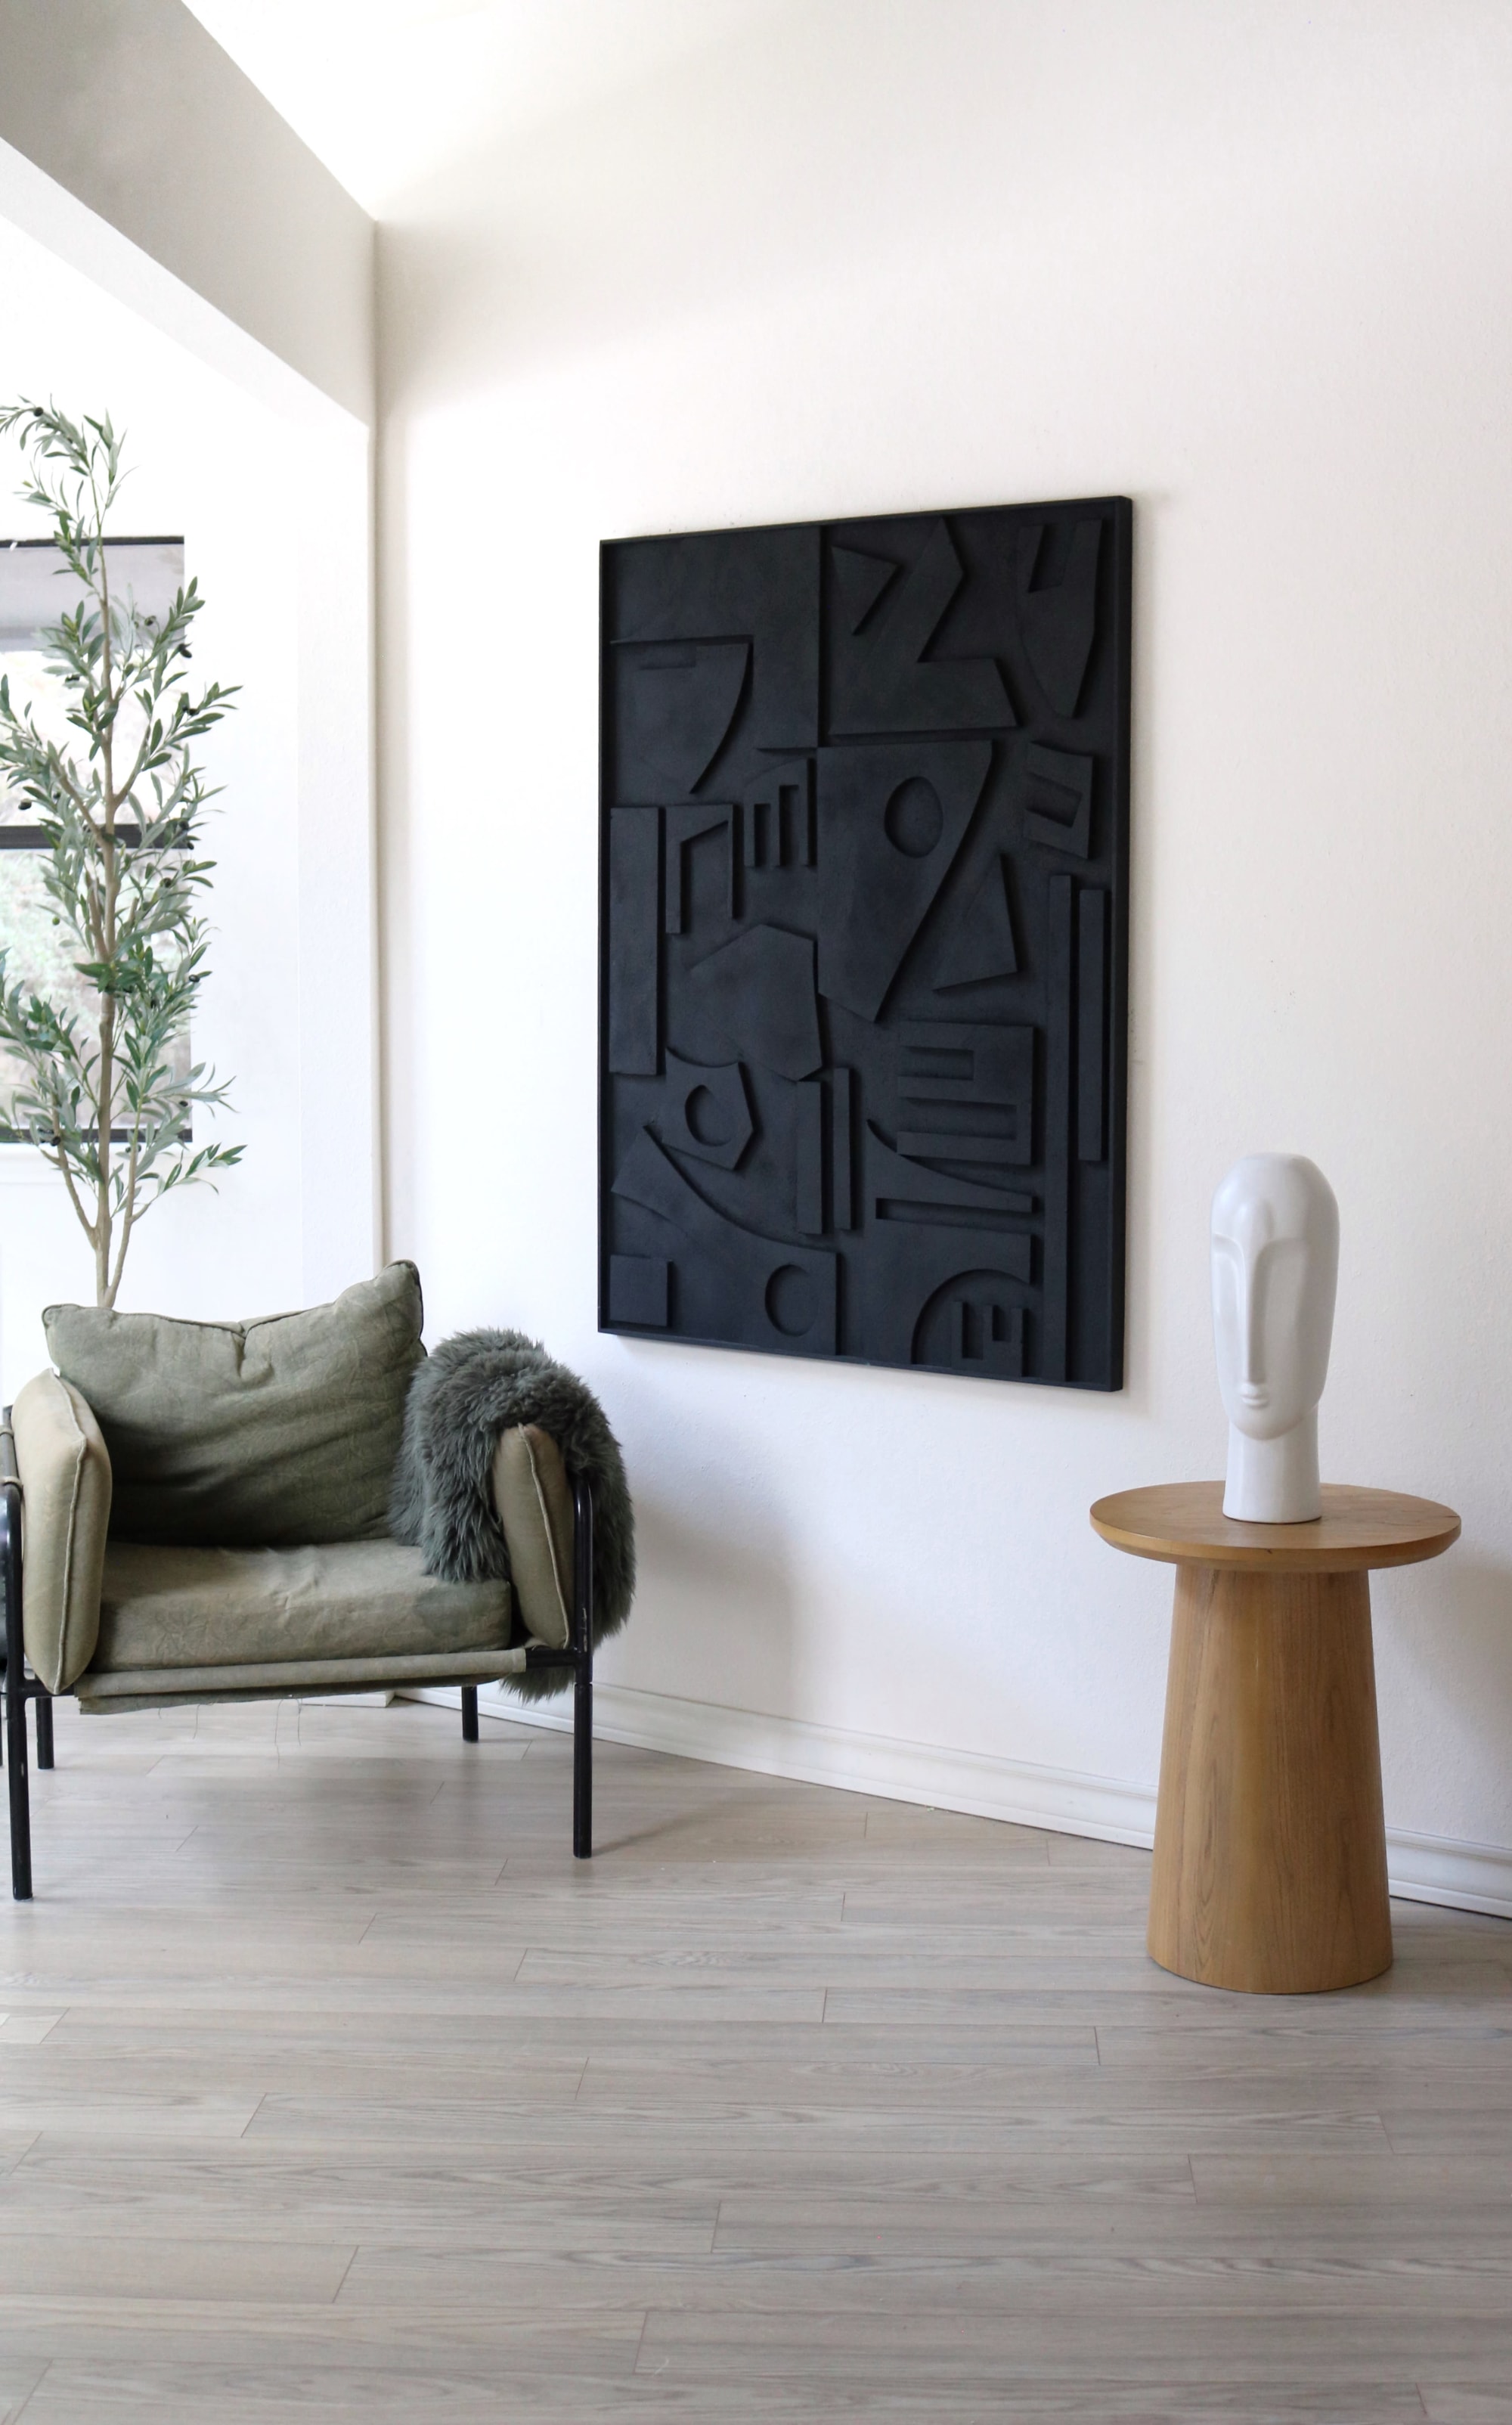 55 Things to Hang on Walls That Aren't Framed Artwork